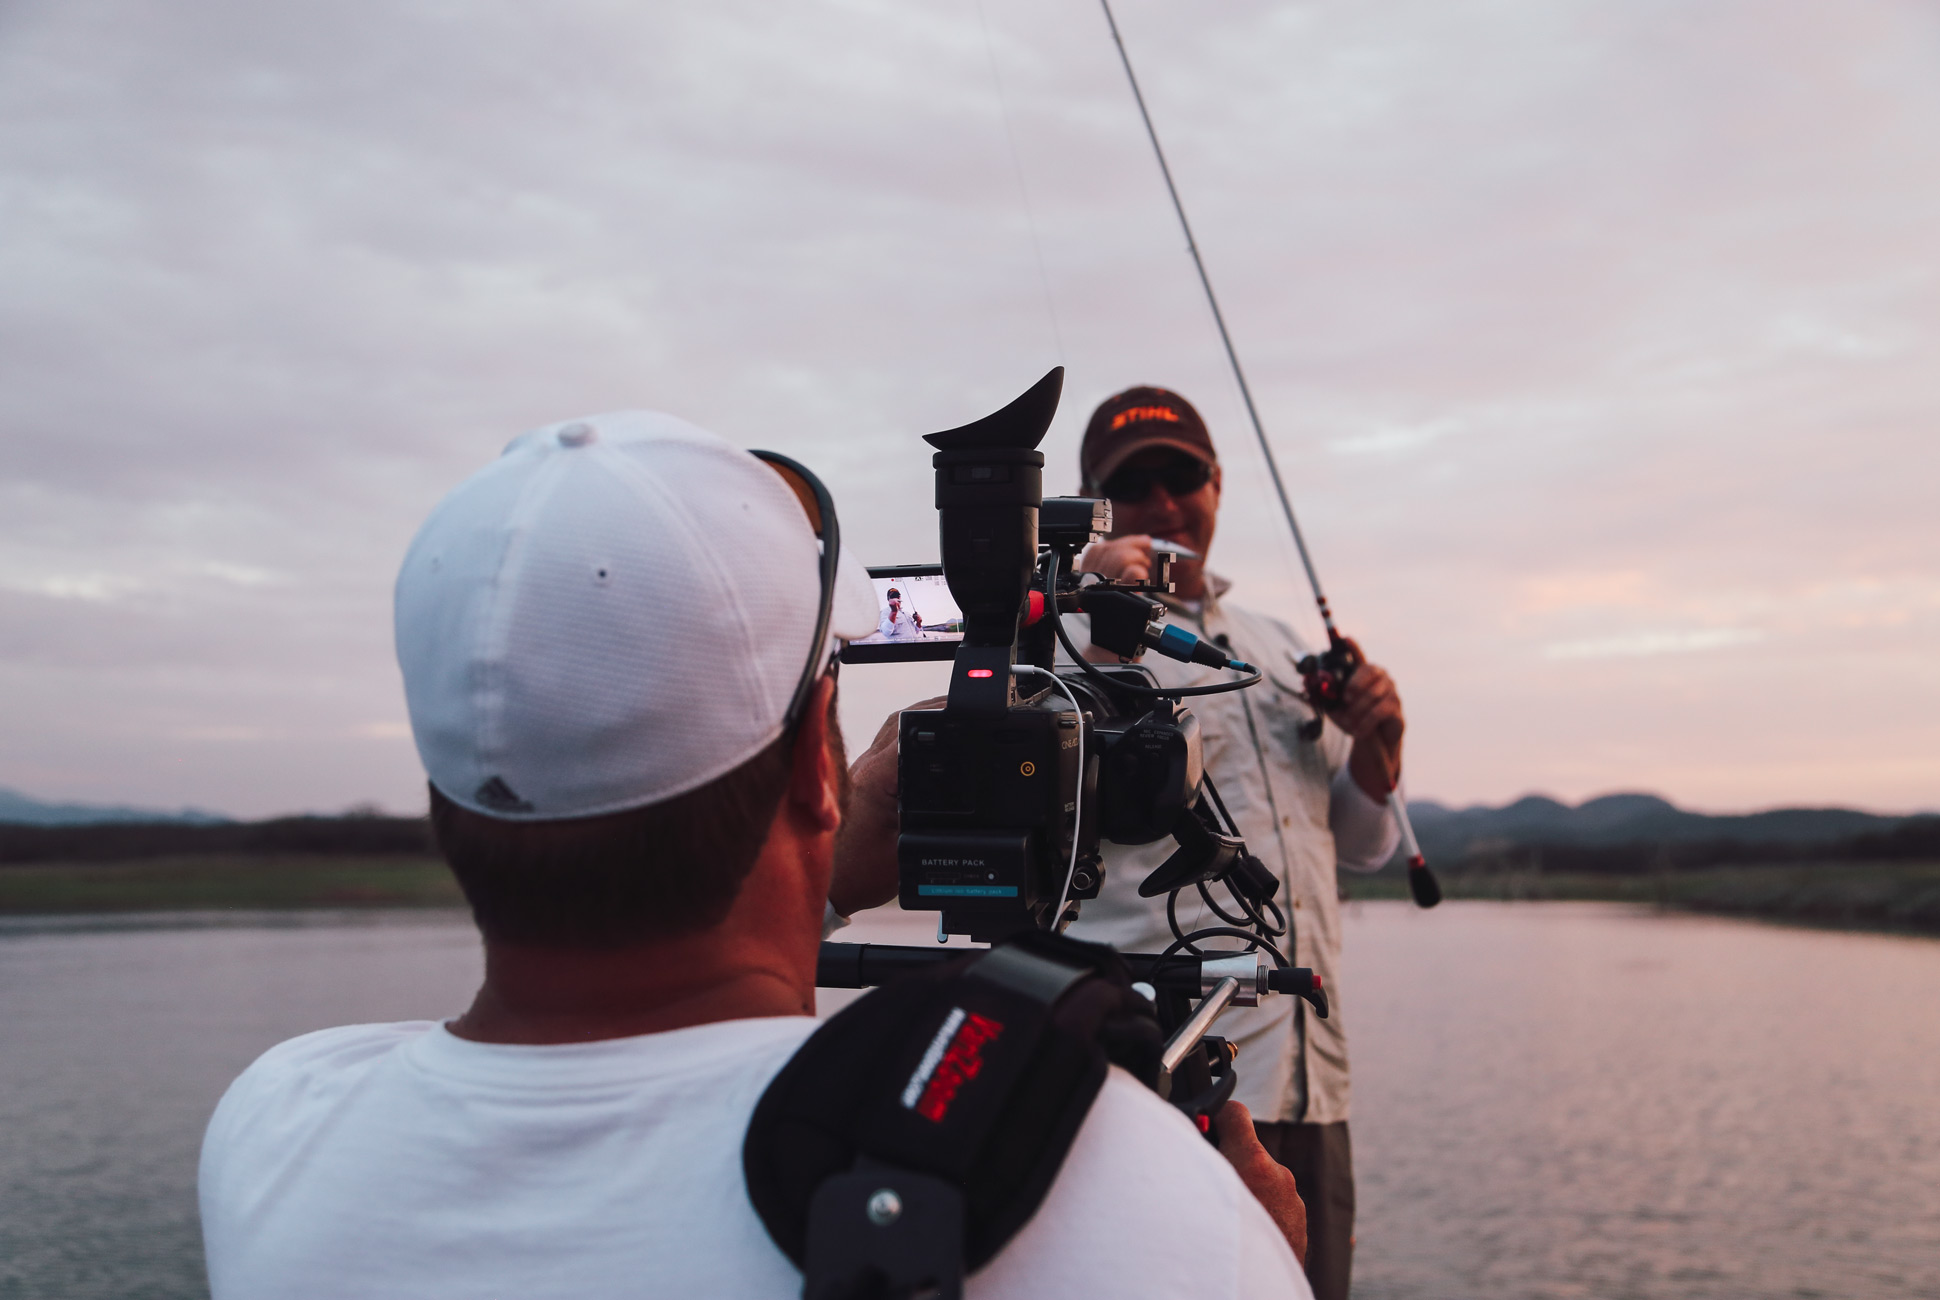 Producer, editor and cameraman Jim Kramer is constantly behind host Joe Thomas as he fishes, stalking the scene with his surprisingly small Sony XD camera on a shoulder mount.